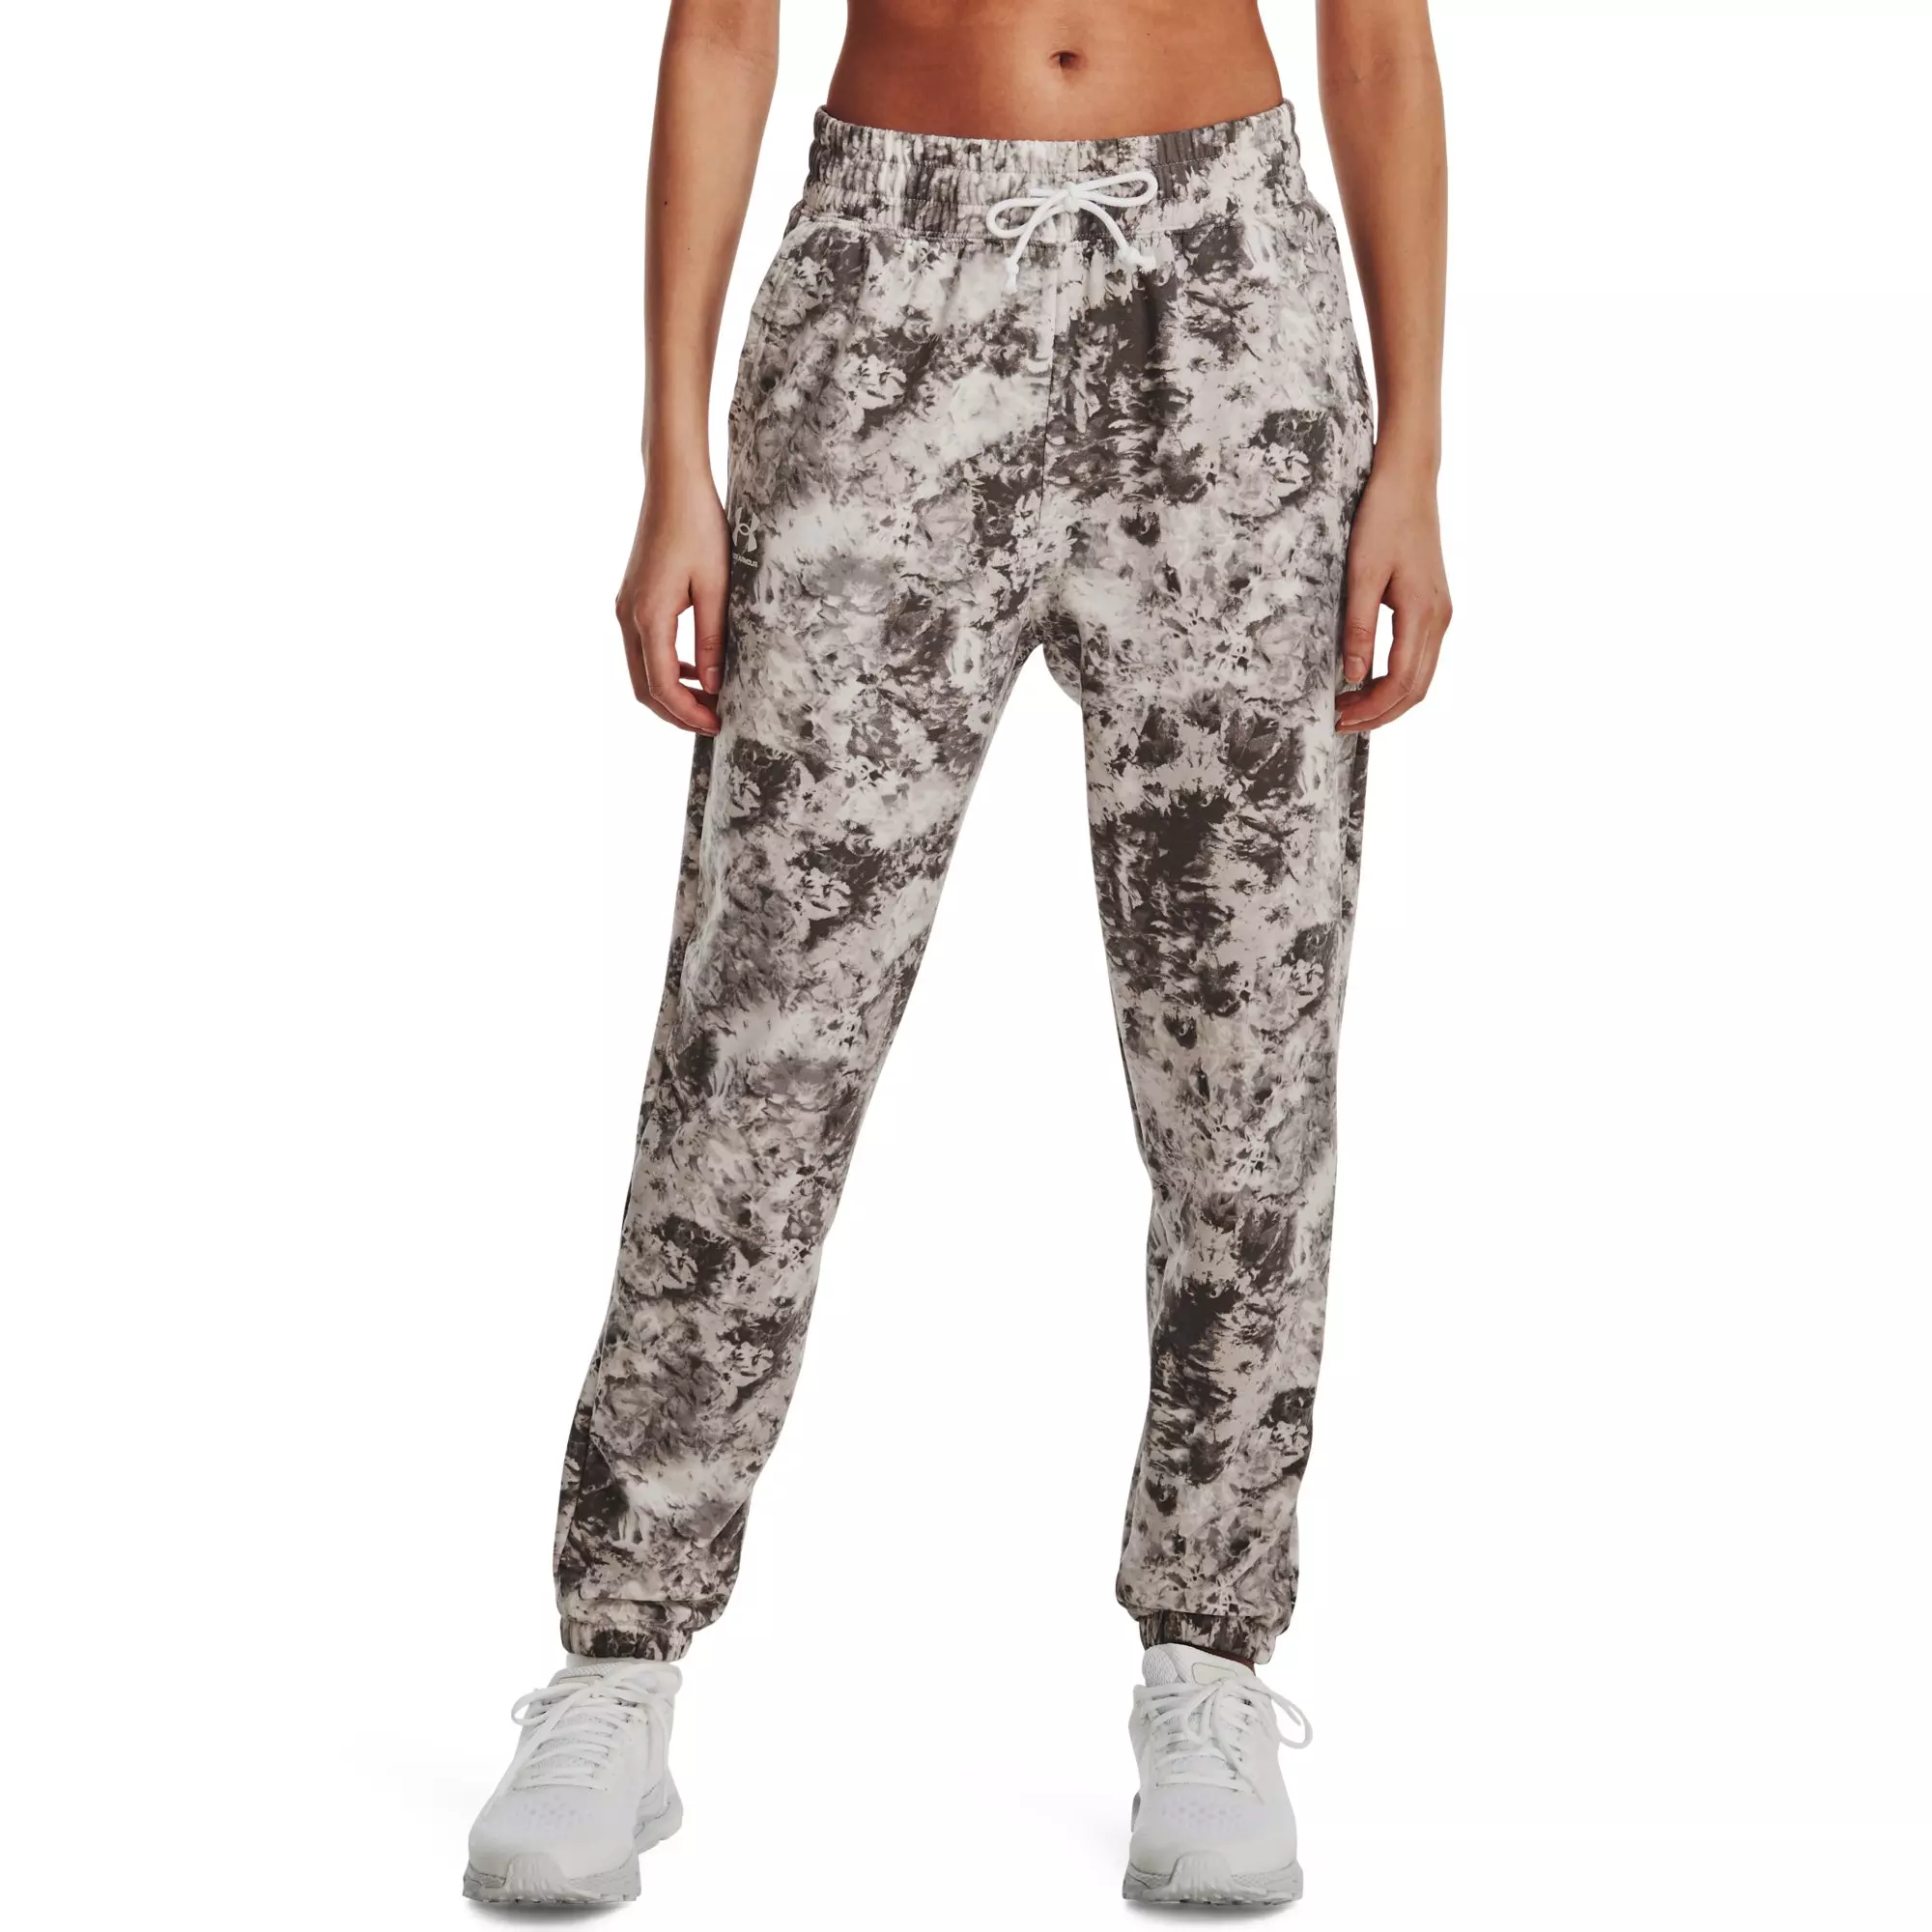 NWT Under Armour women's joggers. Made in Jordan. 100% polyester. Size  small.